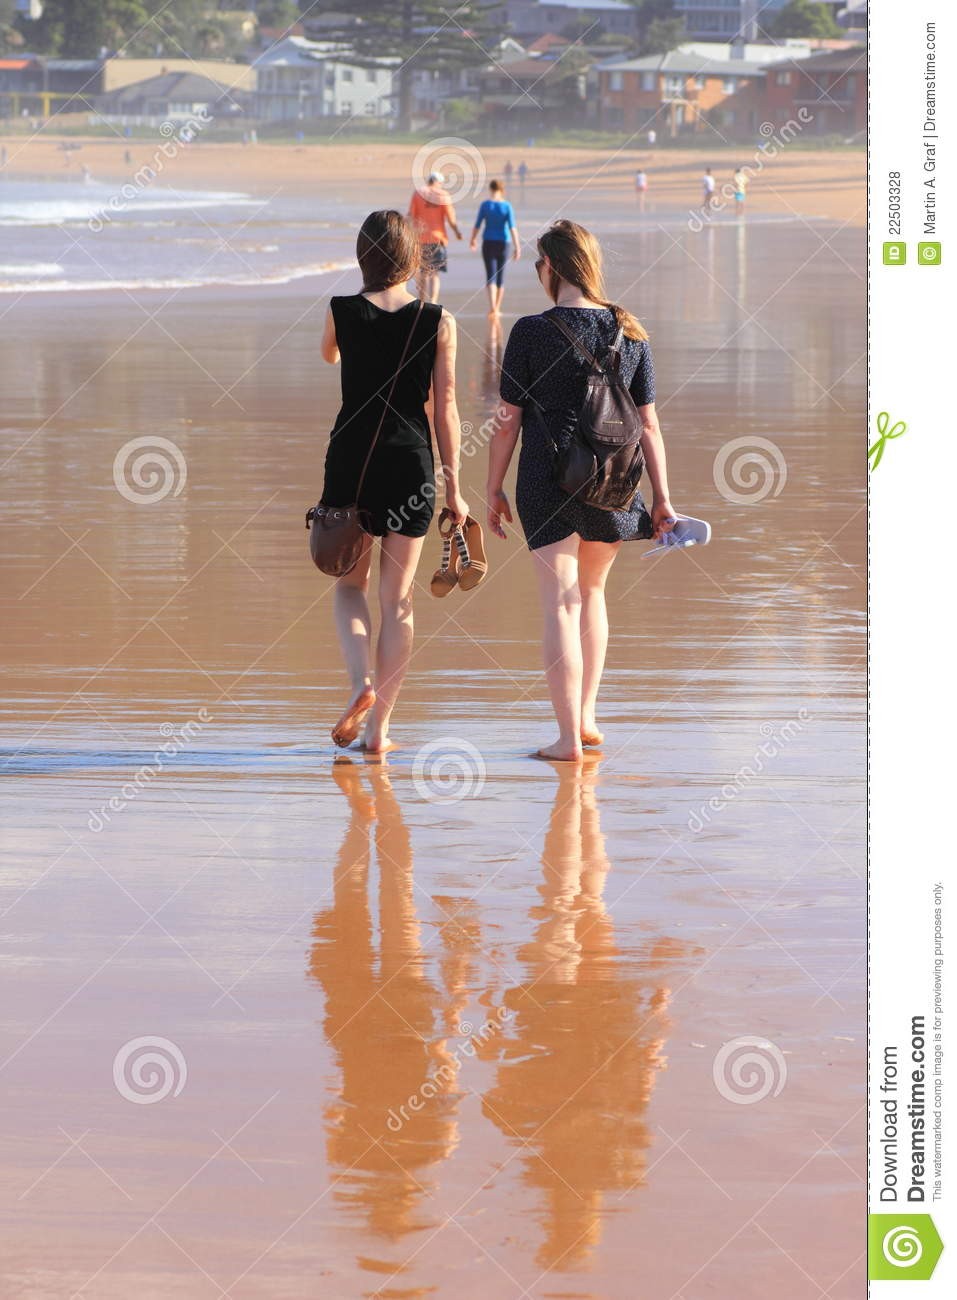 Two Women Mother And Daughter Talking And Walking Relaxed On A Beach